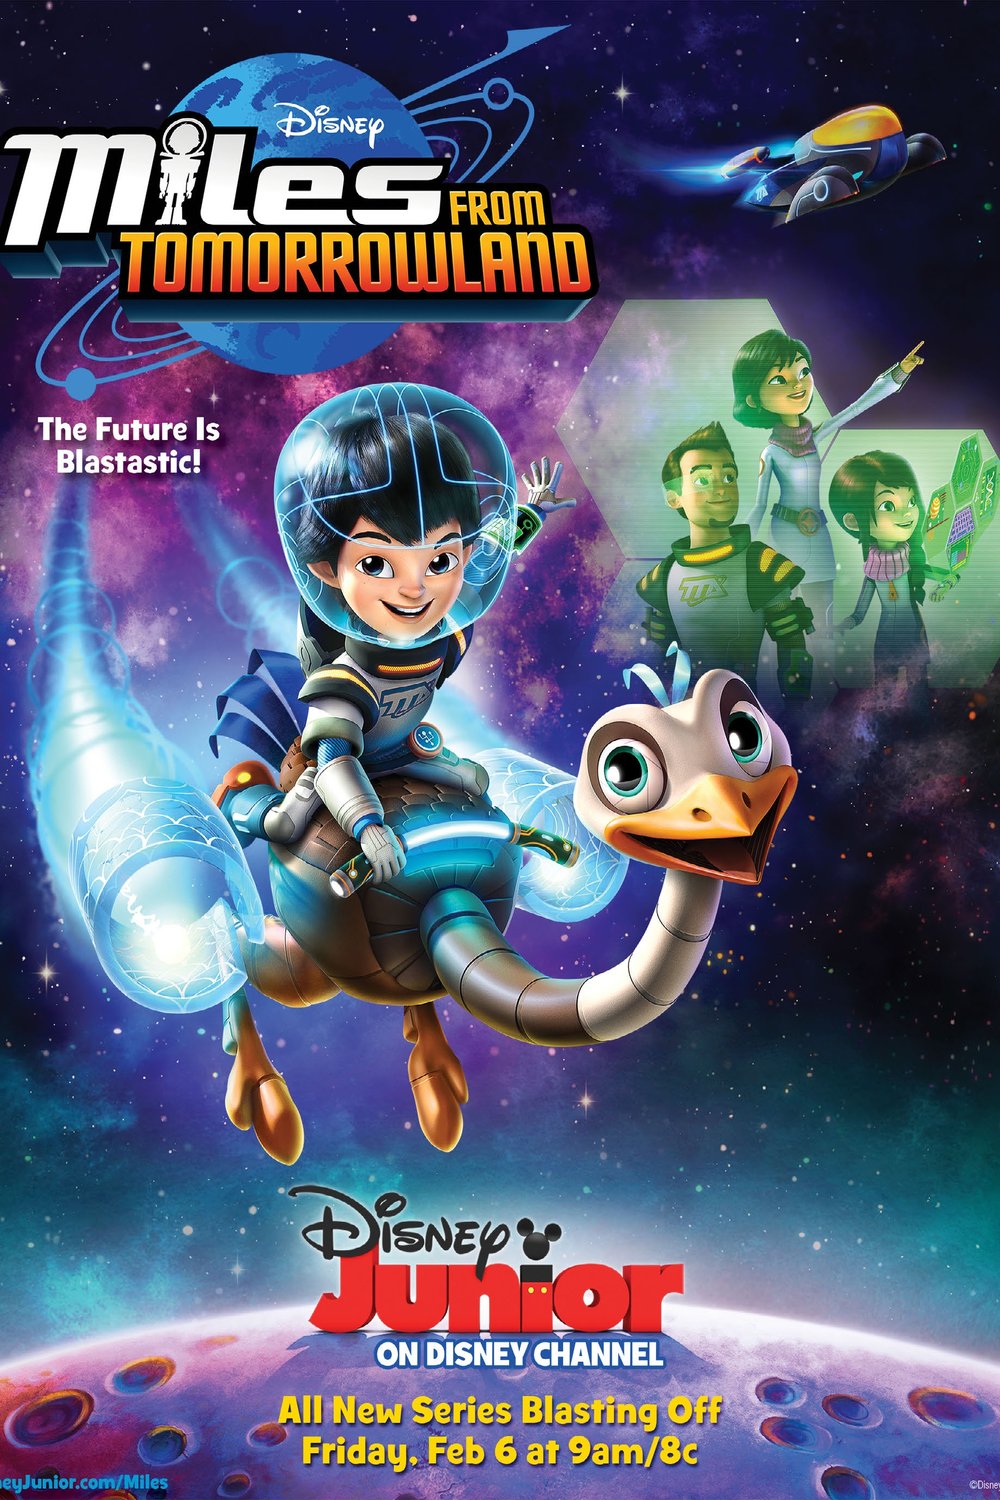 Poster of the movie Miles from Tomorrowland